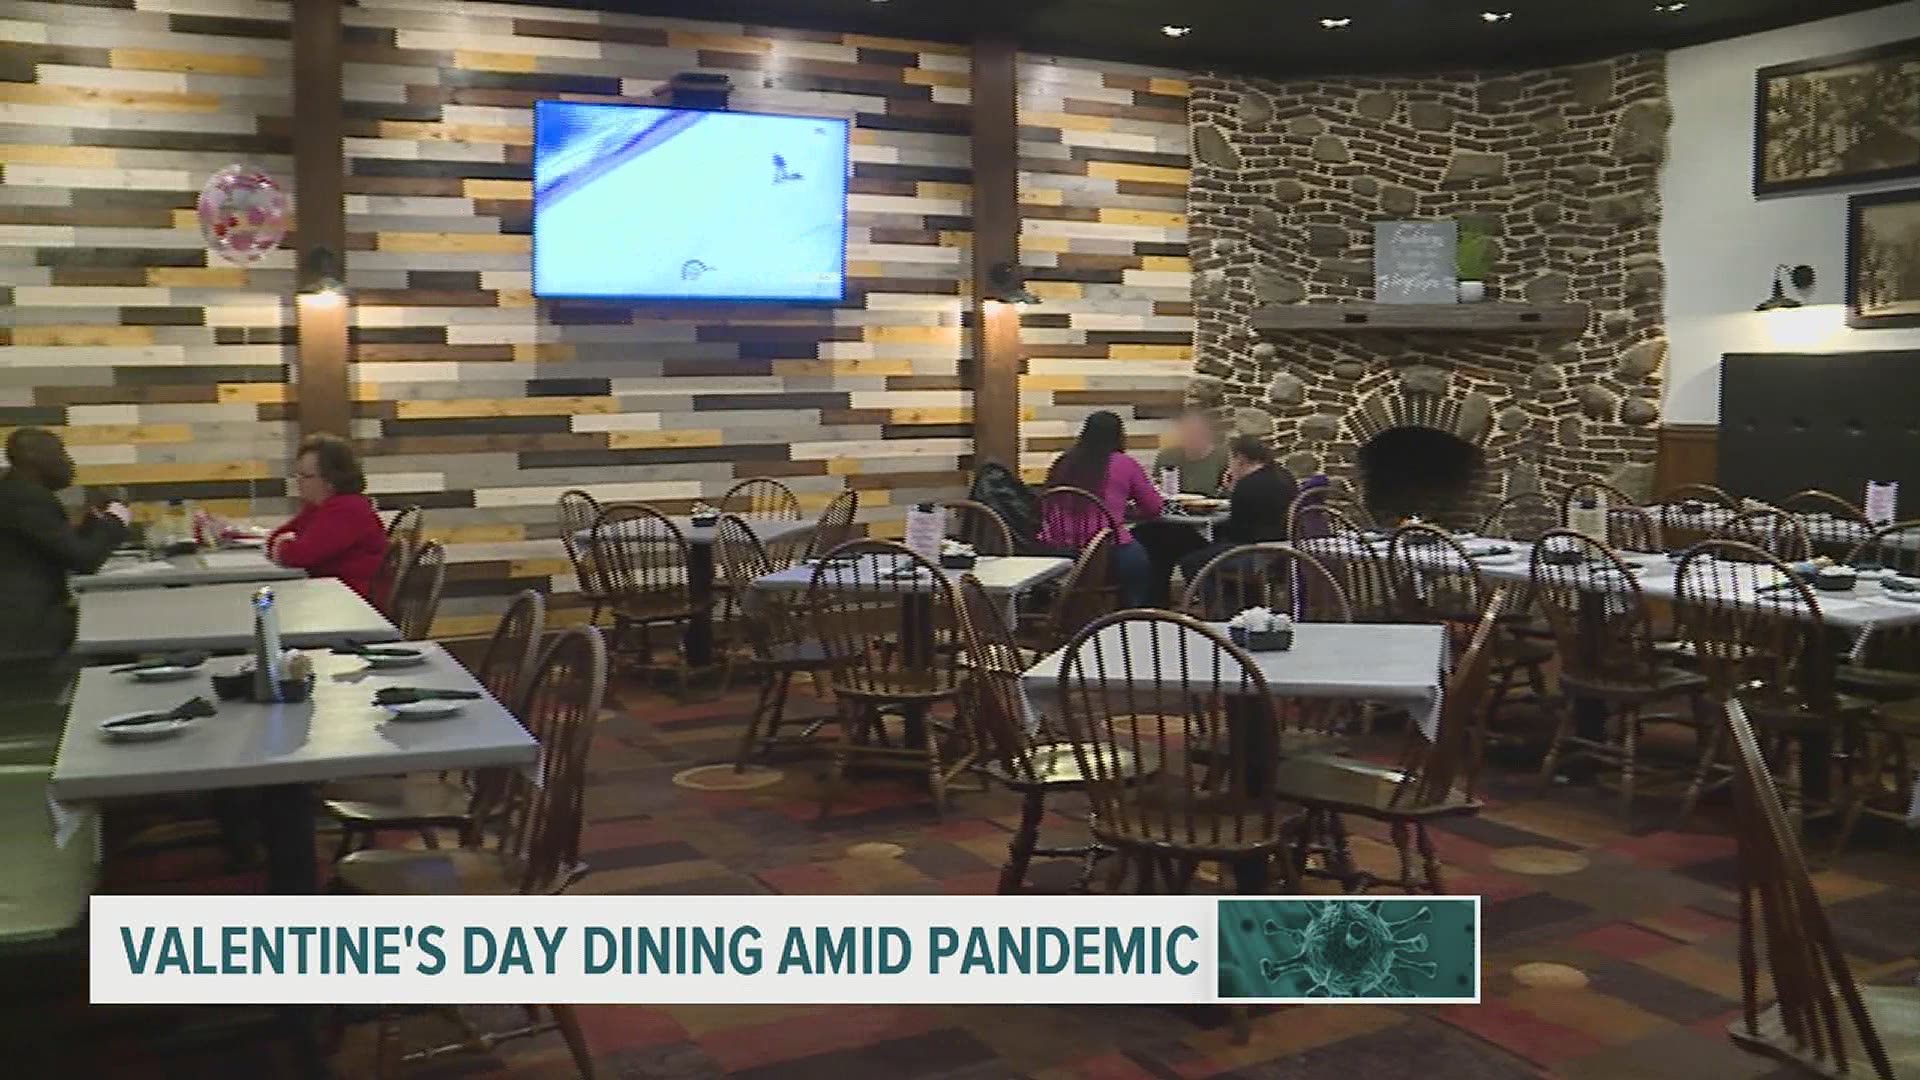 Even as Valentine’s Day weekend saw booked out restaurant, the restaurant industry continues to struggle amid pandemic restrictions and winter weather.